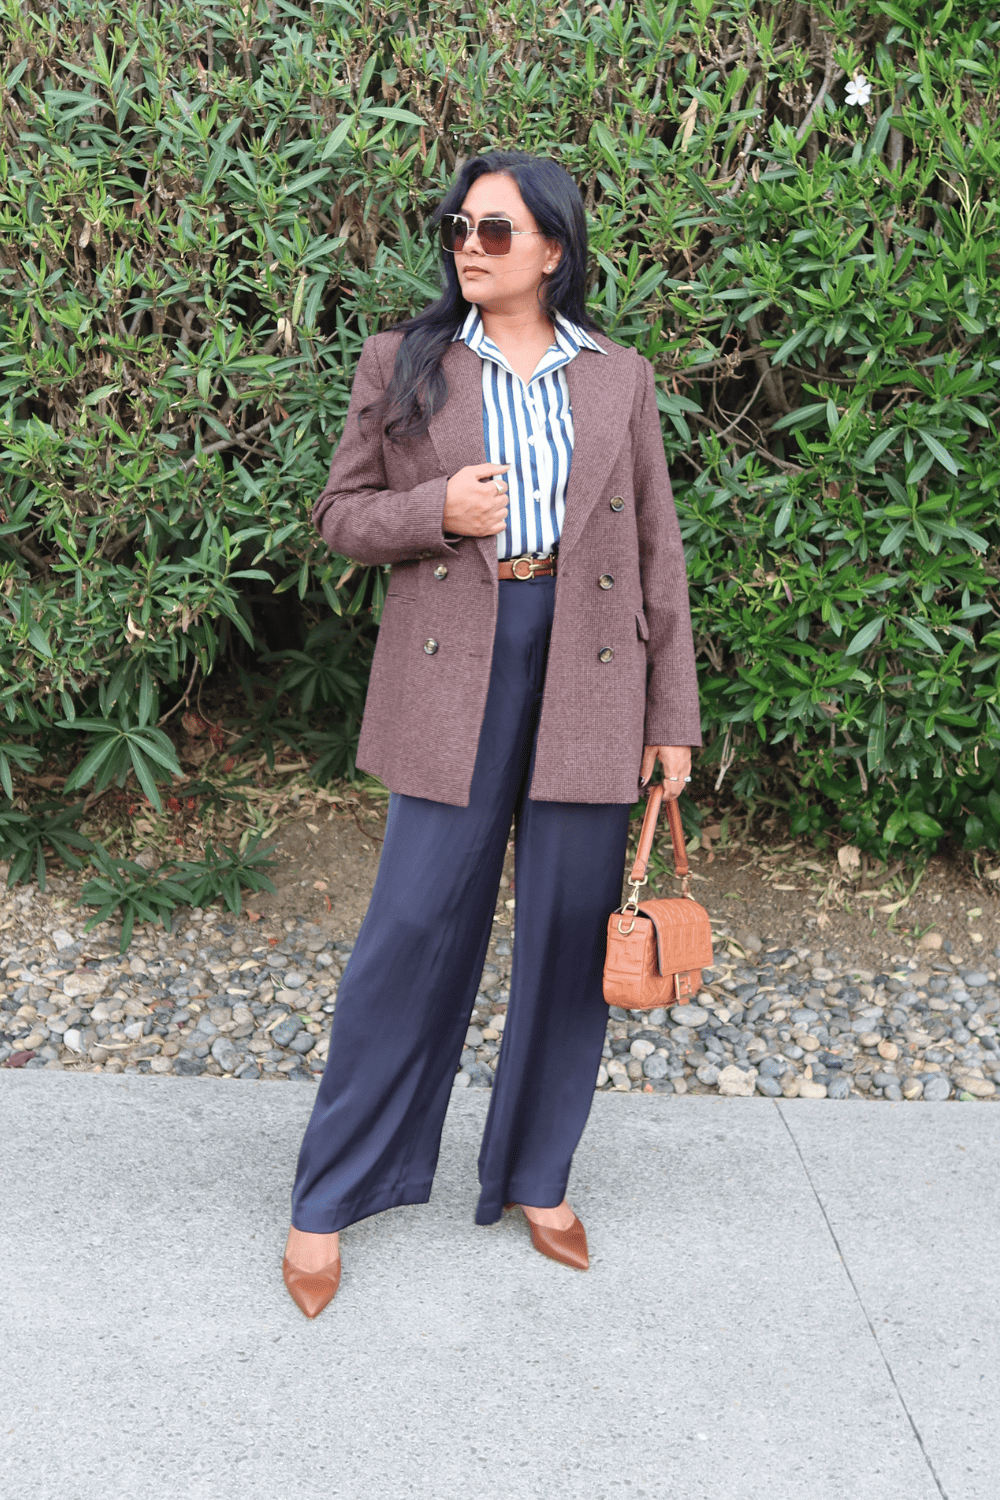 Satin pants outfit with striped shirt and blazer